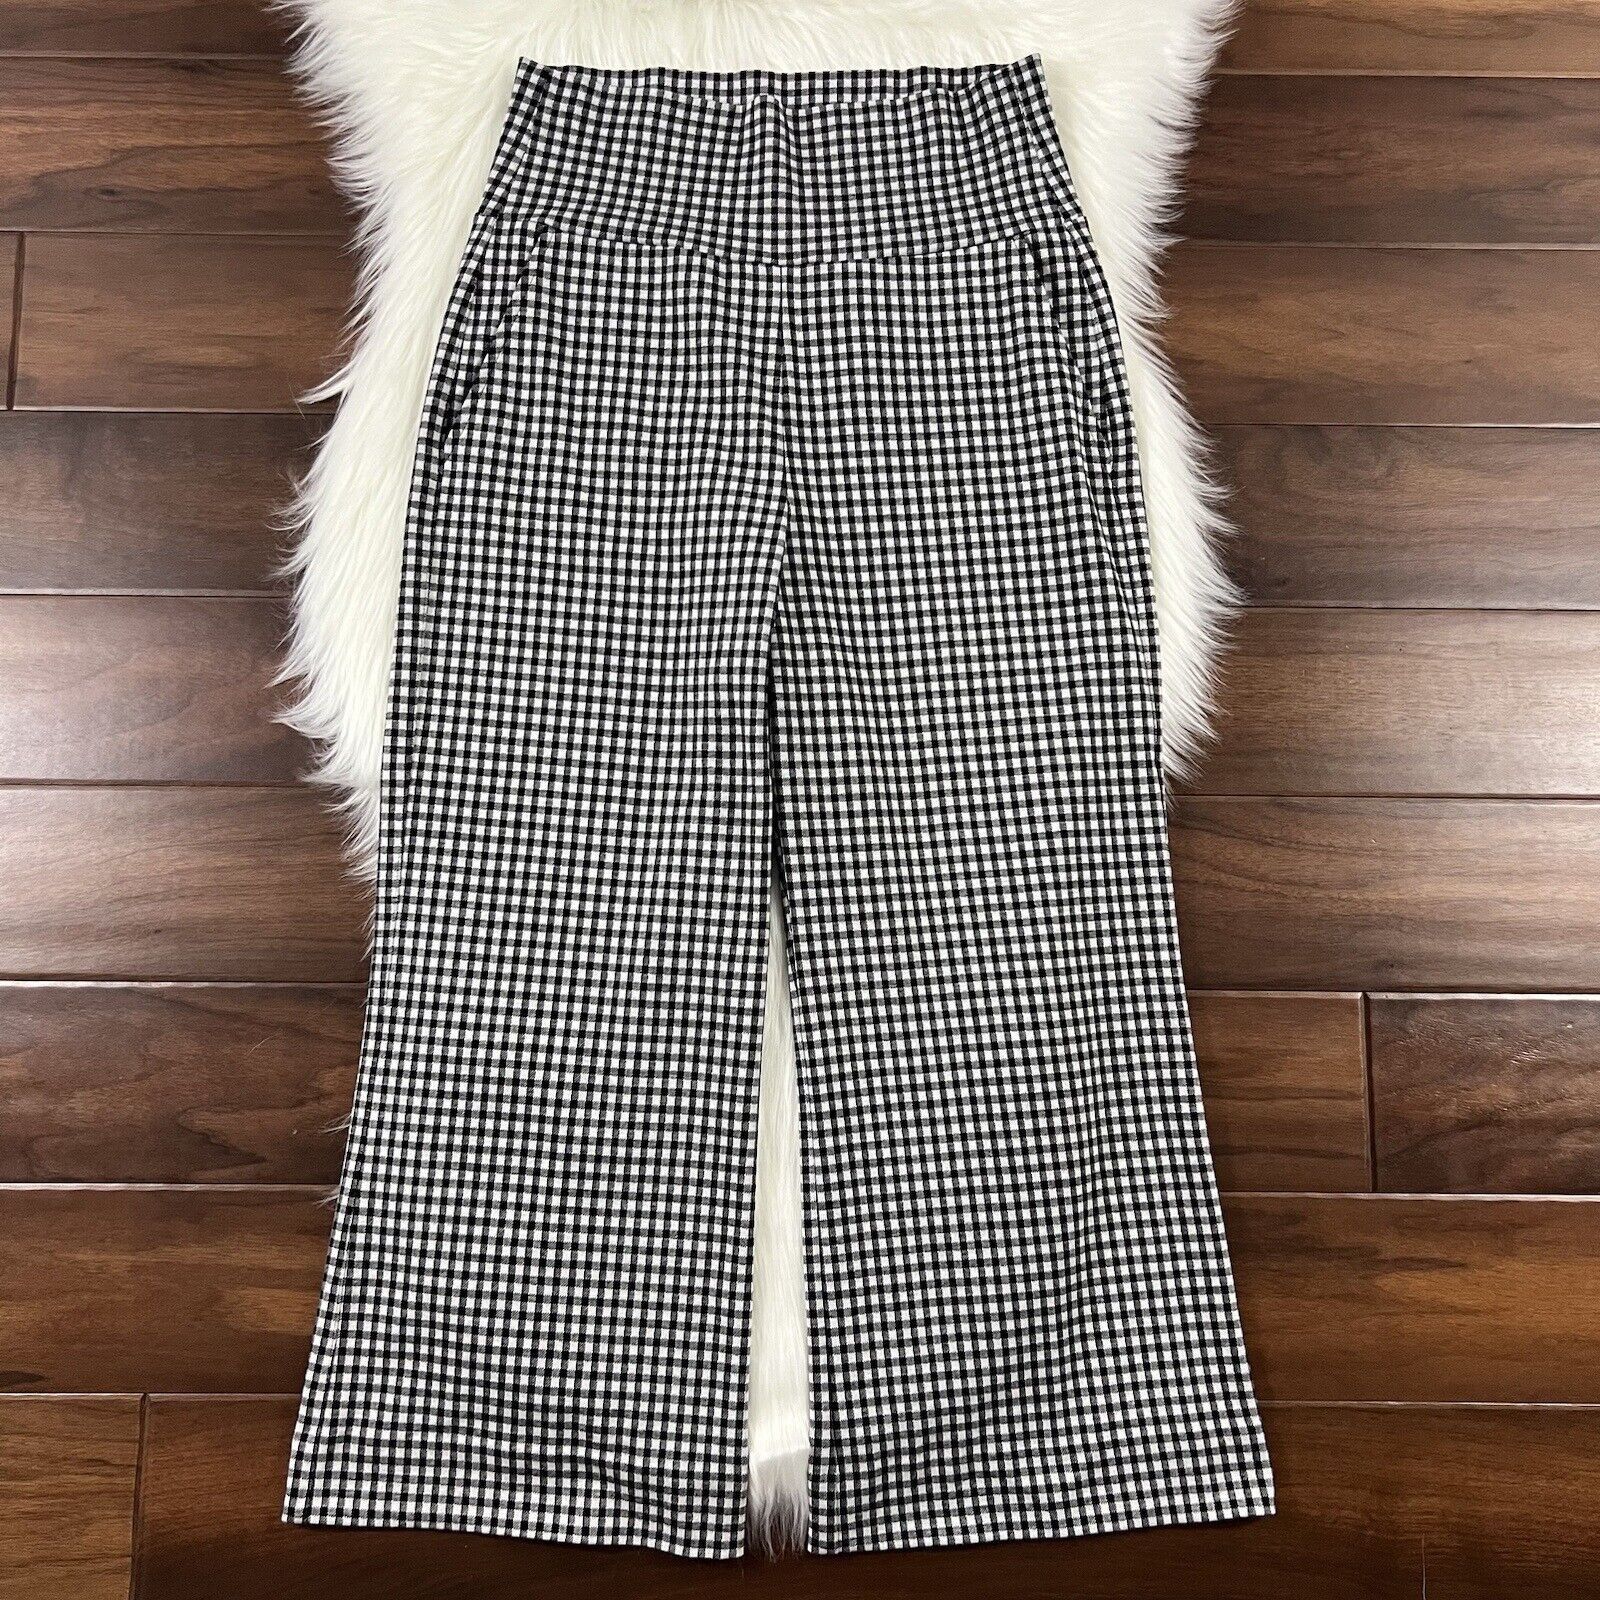 Cabi New NWT Bombshell Crop #6047 Black & White check XS - XL Was $136 